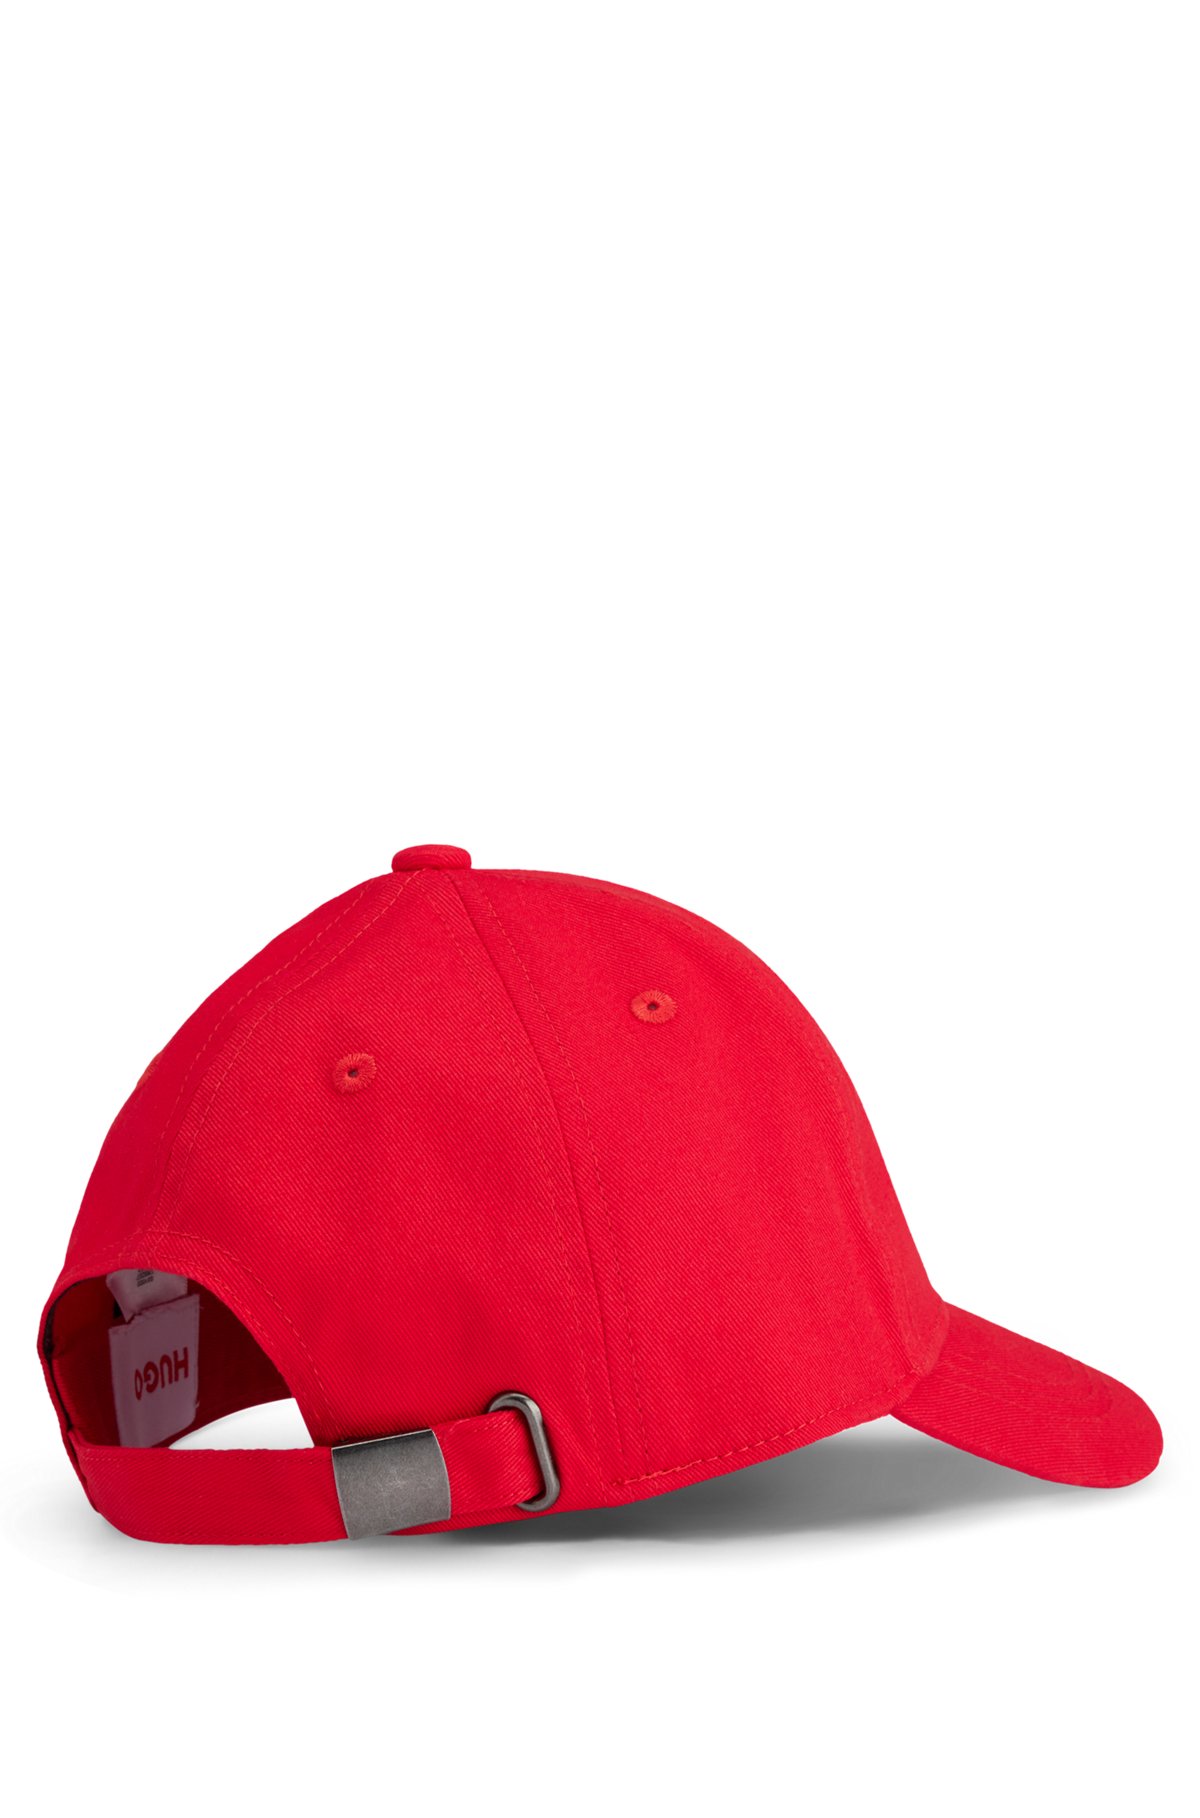 Kids' cap in cotton twill with red logo label, Red